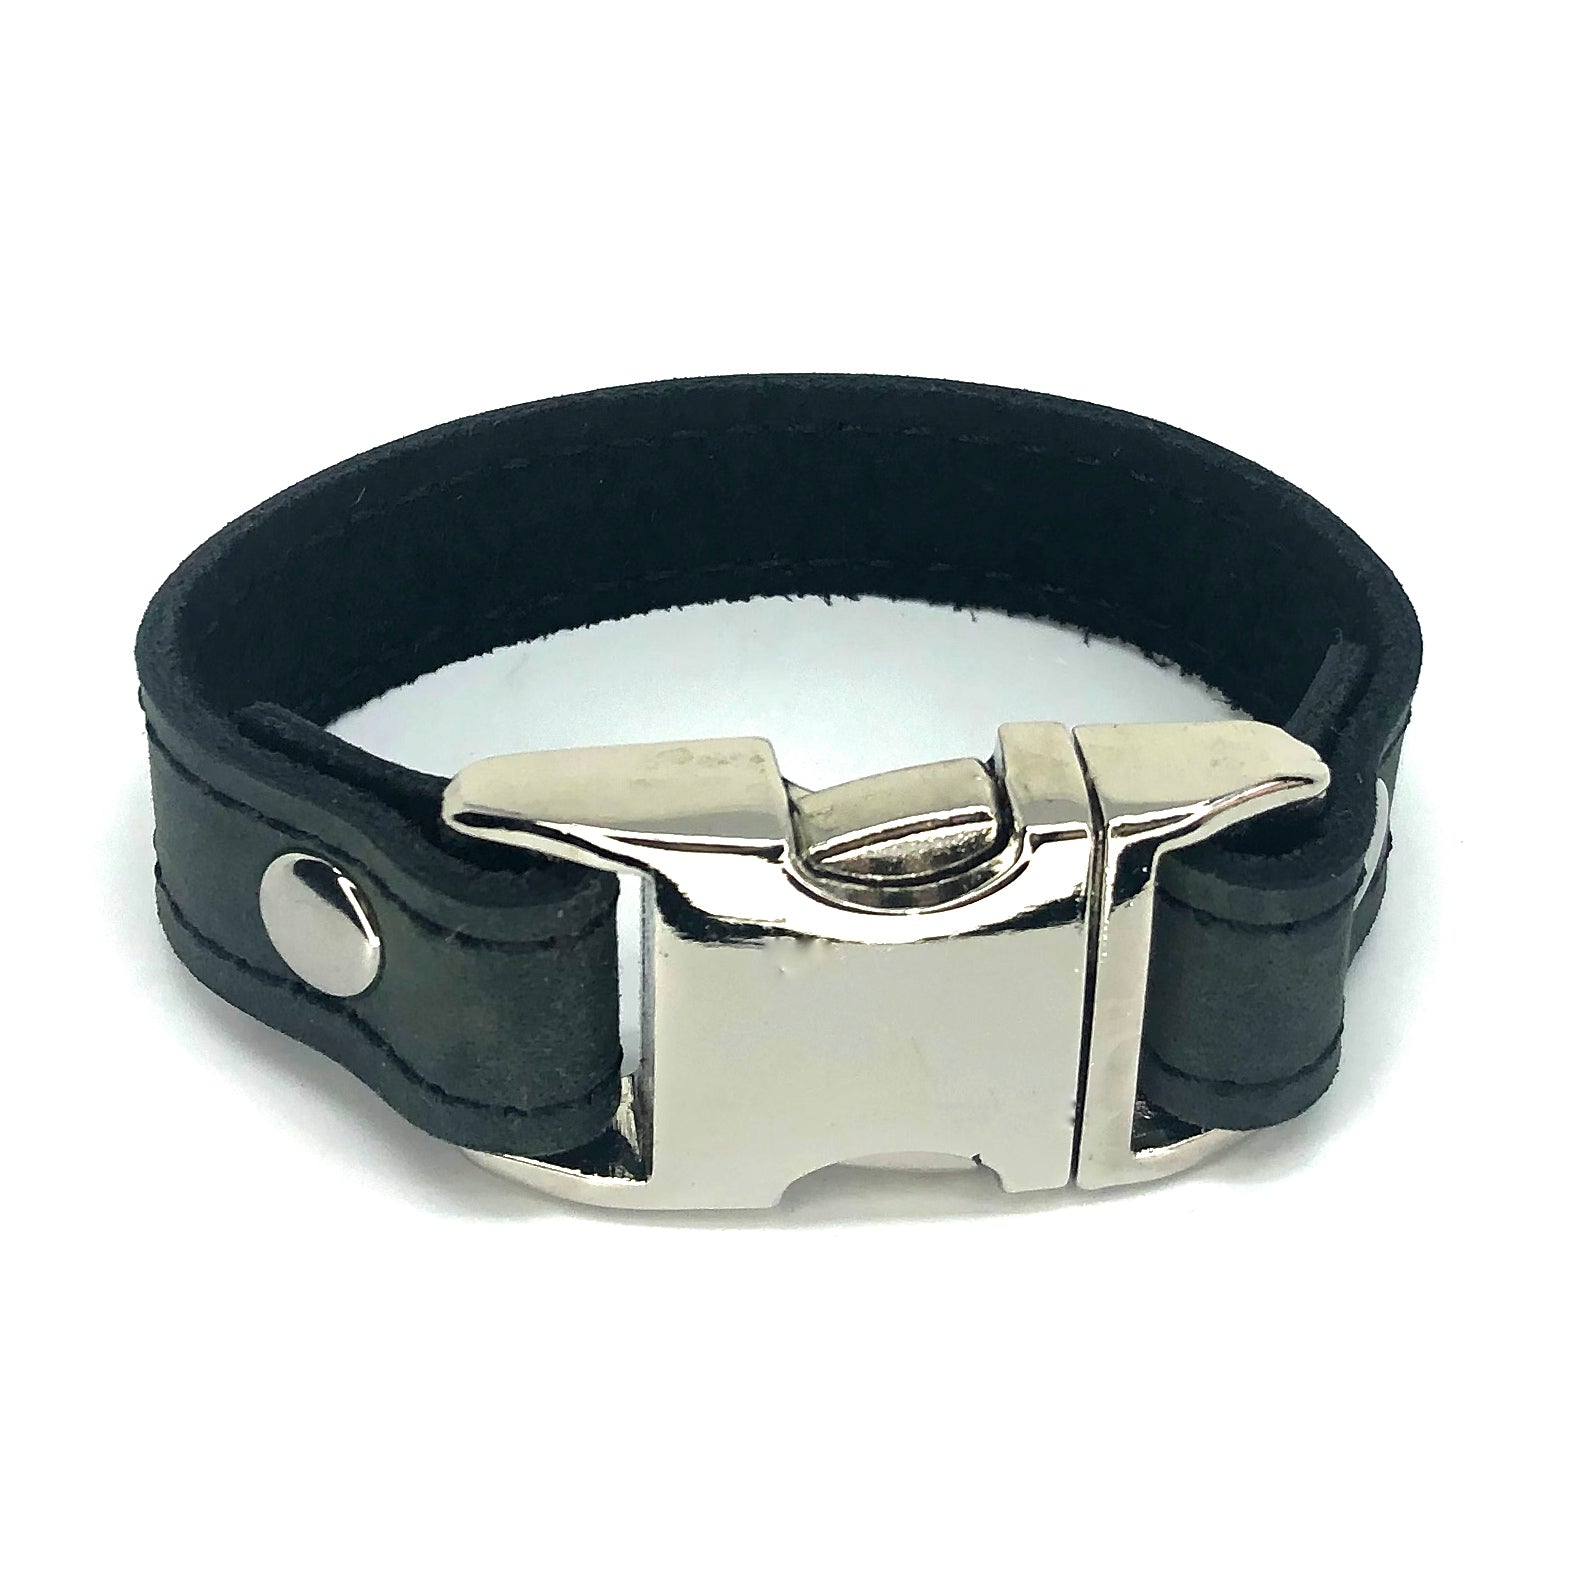 Distressed leather bracelet with side squeeze aluminum buckle by NYET Jewelry